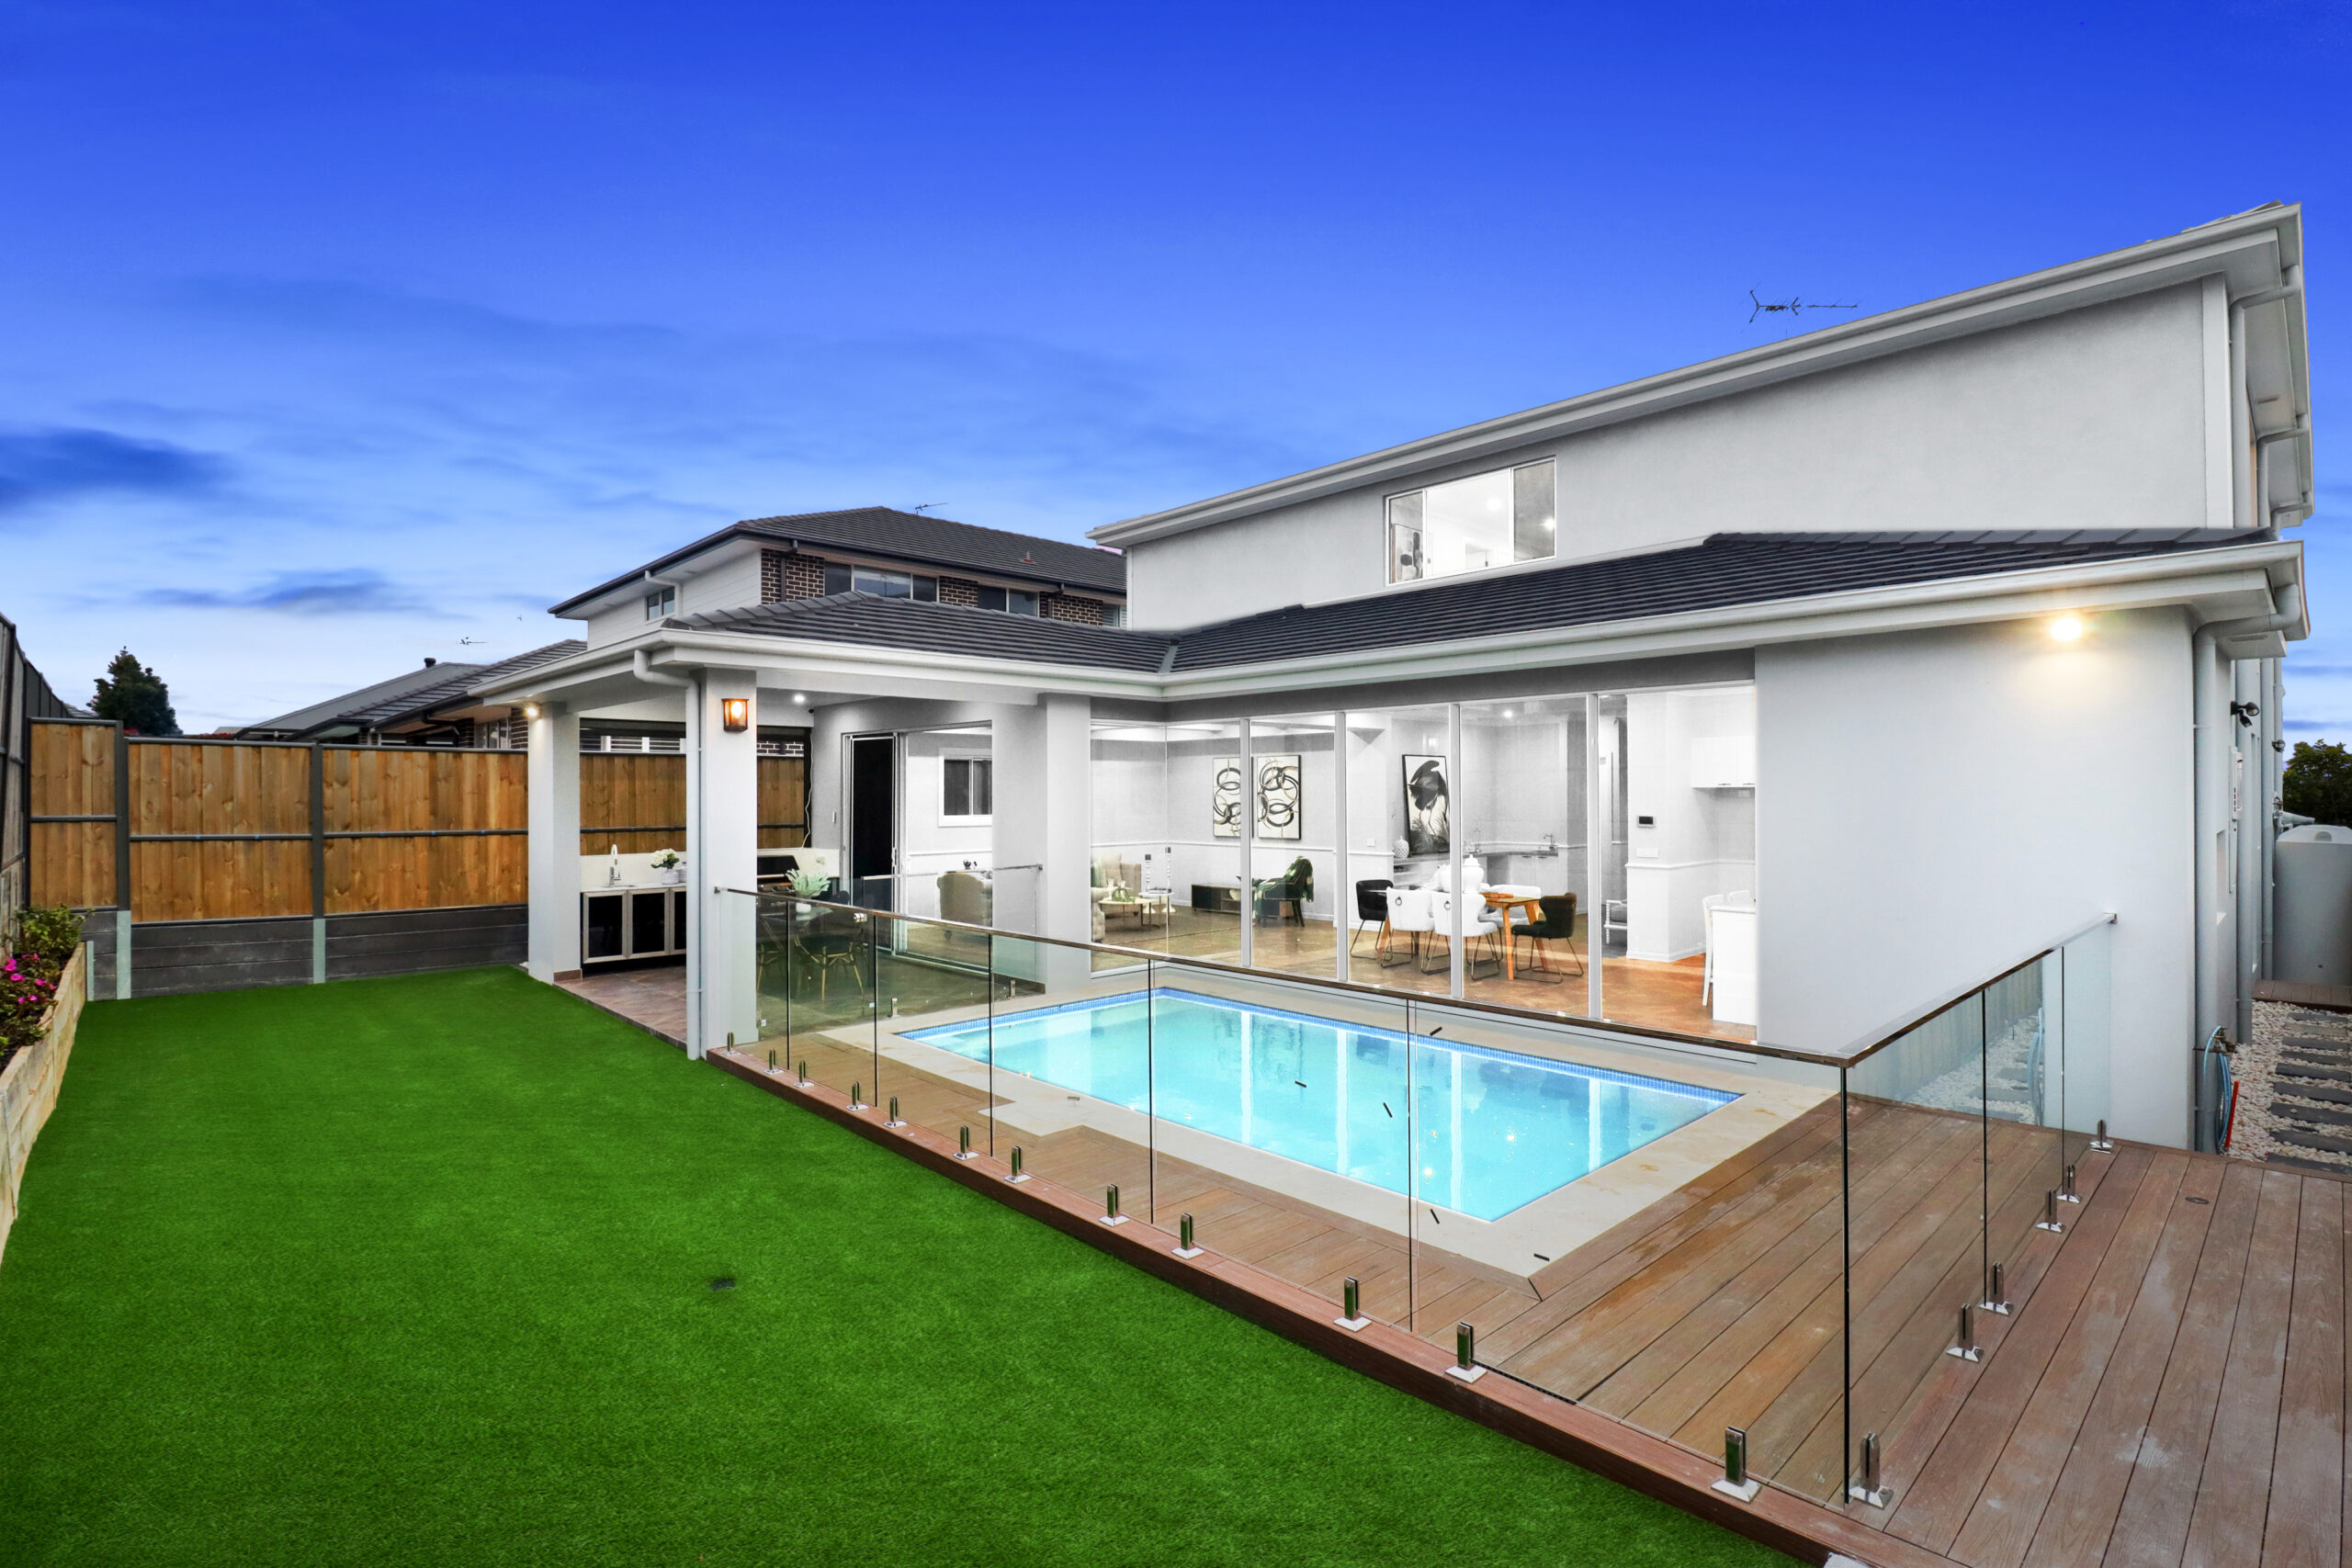 Pool area of Deepwater Circuit, North Kellyville, built by Dream Homes Custom Build